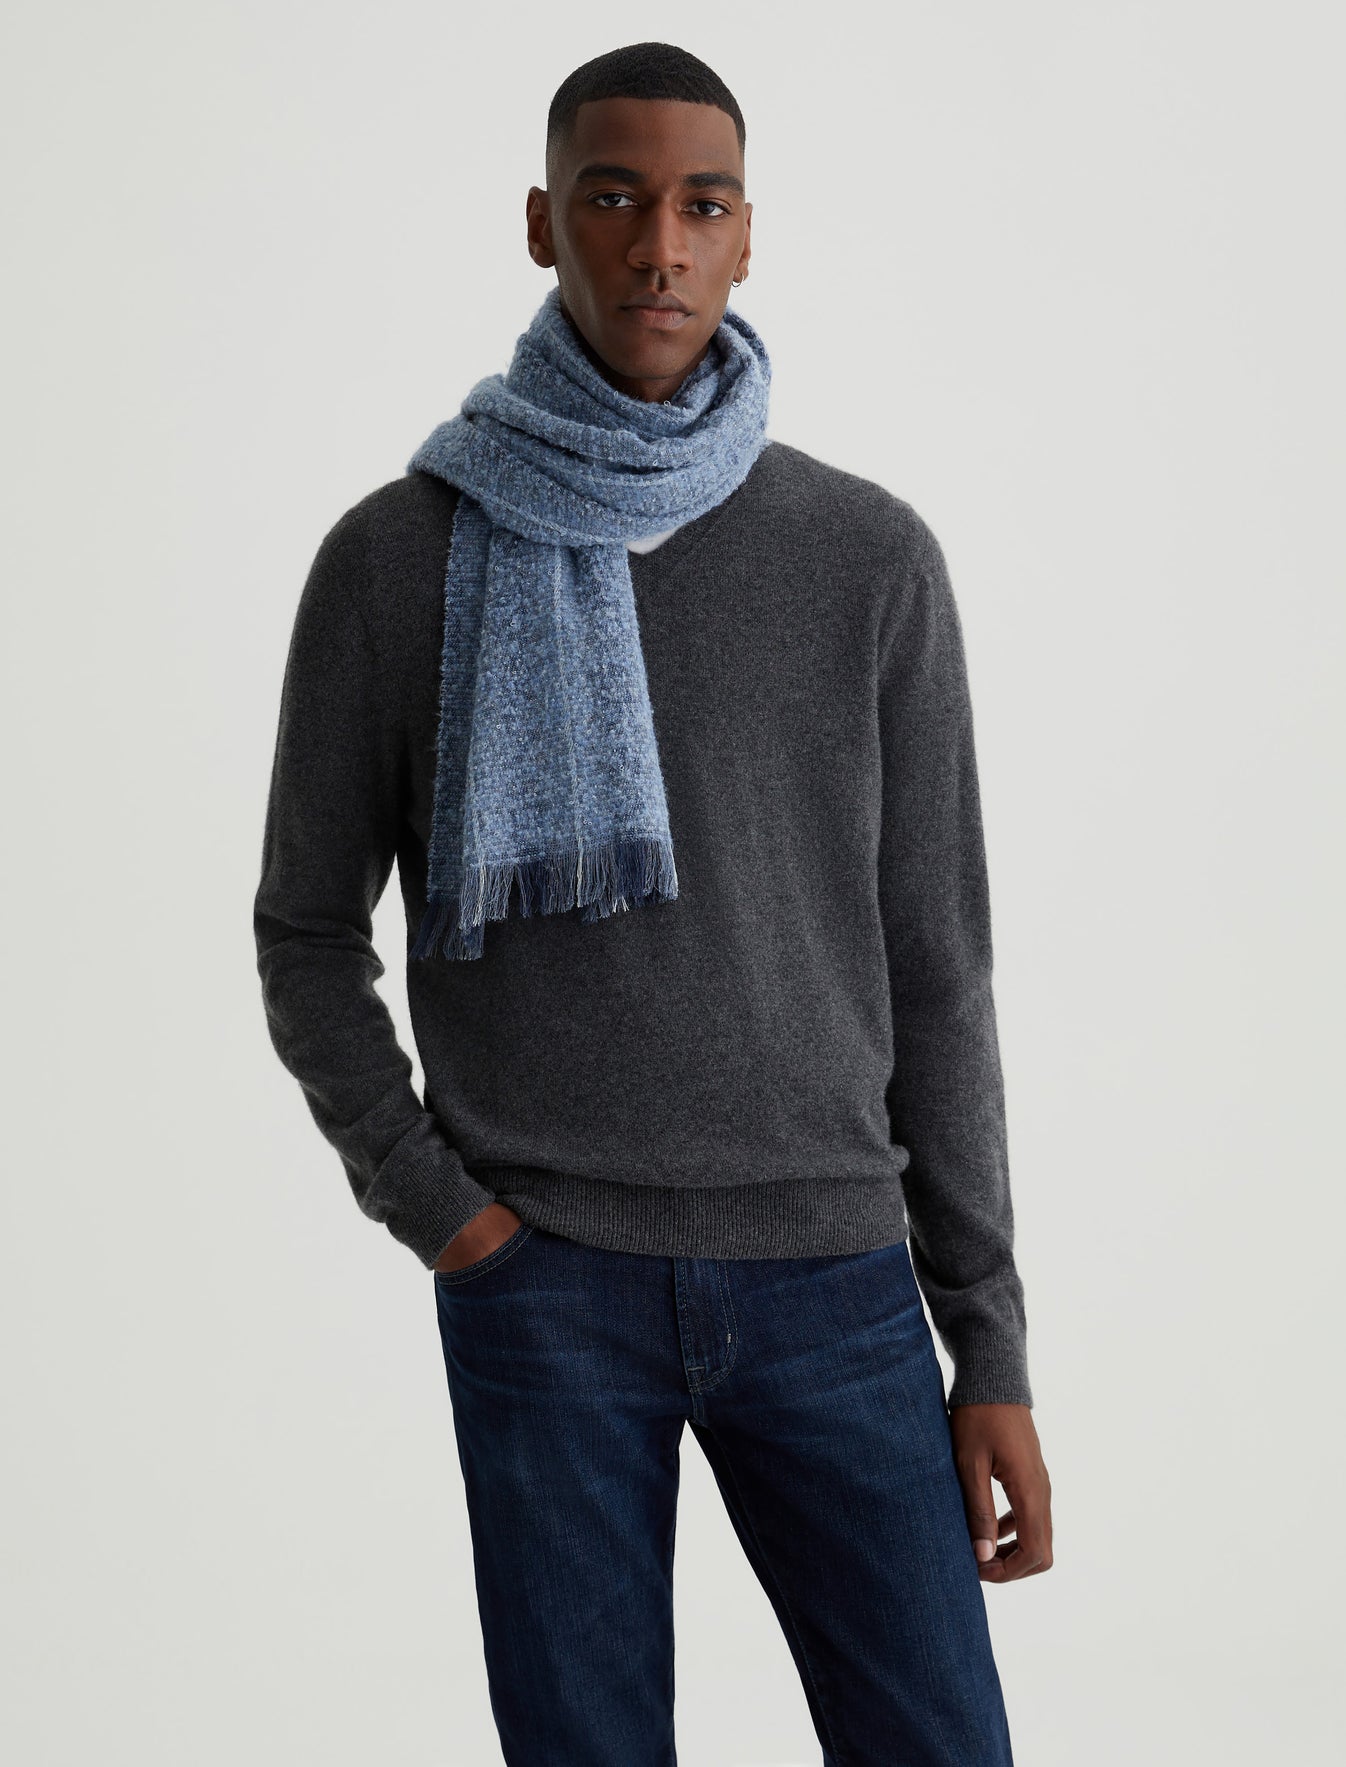 Jeans Stripe Arden AG at Wool Accessory Official Store Indigo Scarf